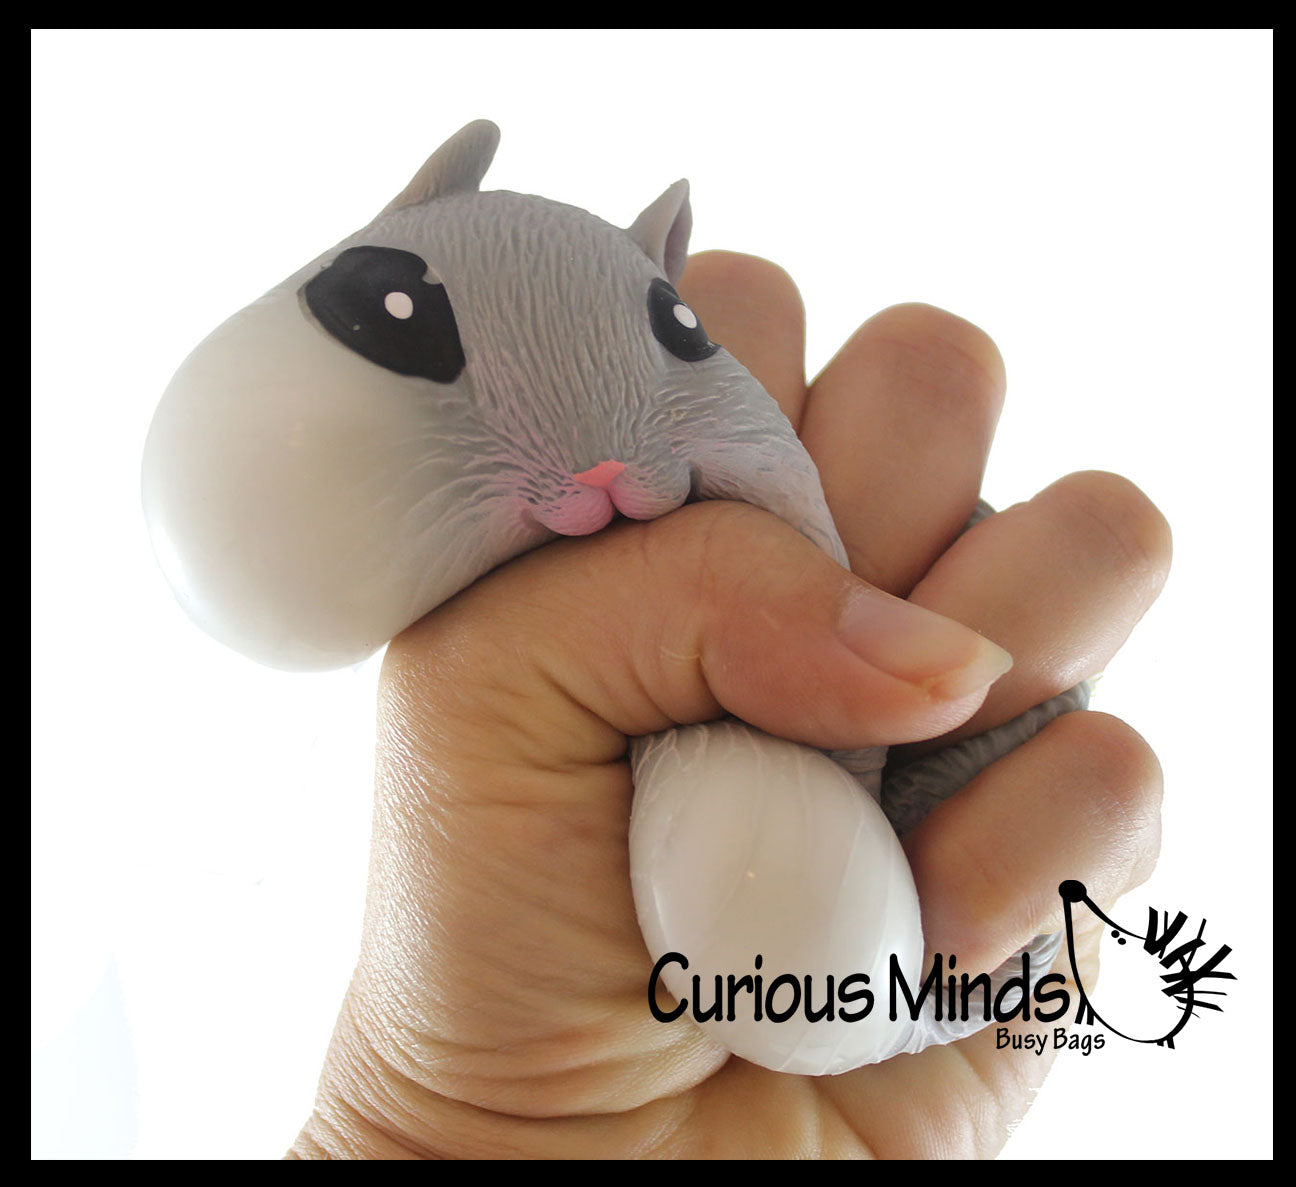 Chunky Cheek Hamster Stretchy and Squeezy Toy - Soft Doh Filled - Fidget Stress Ball Cute Hampster